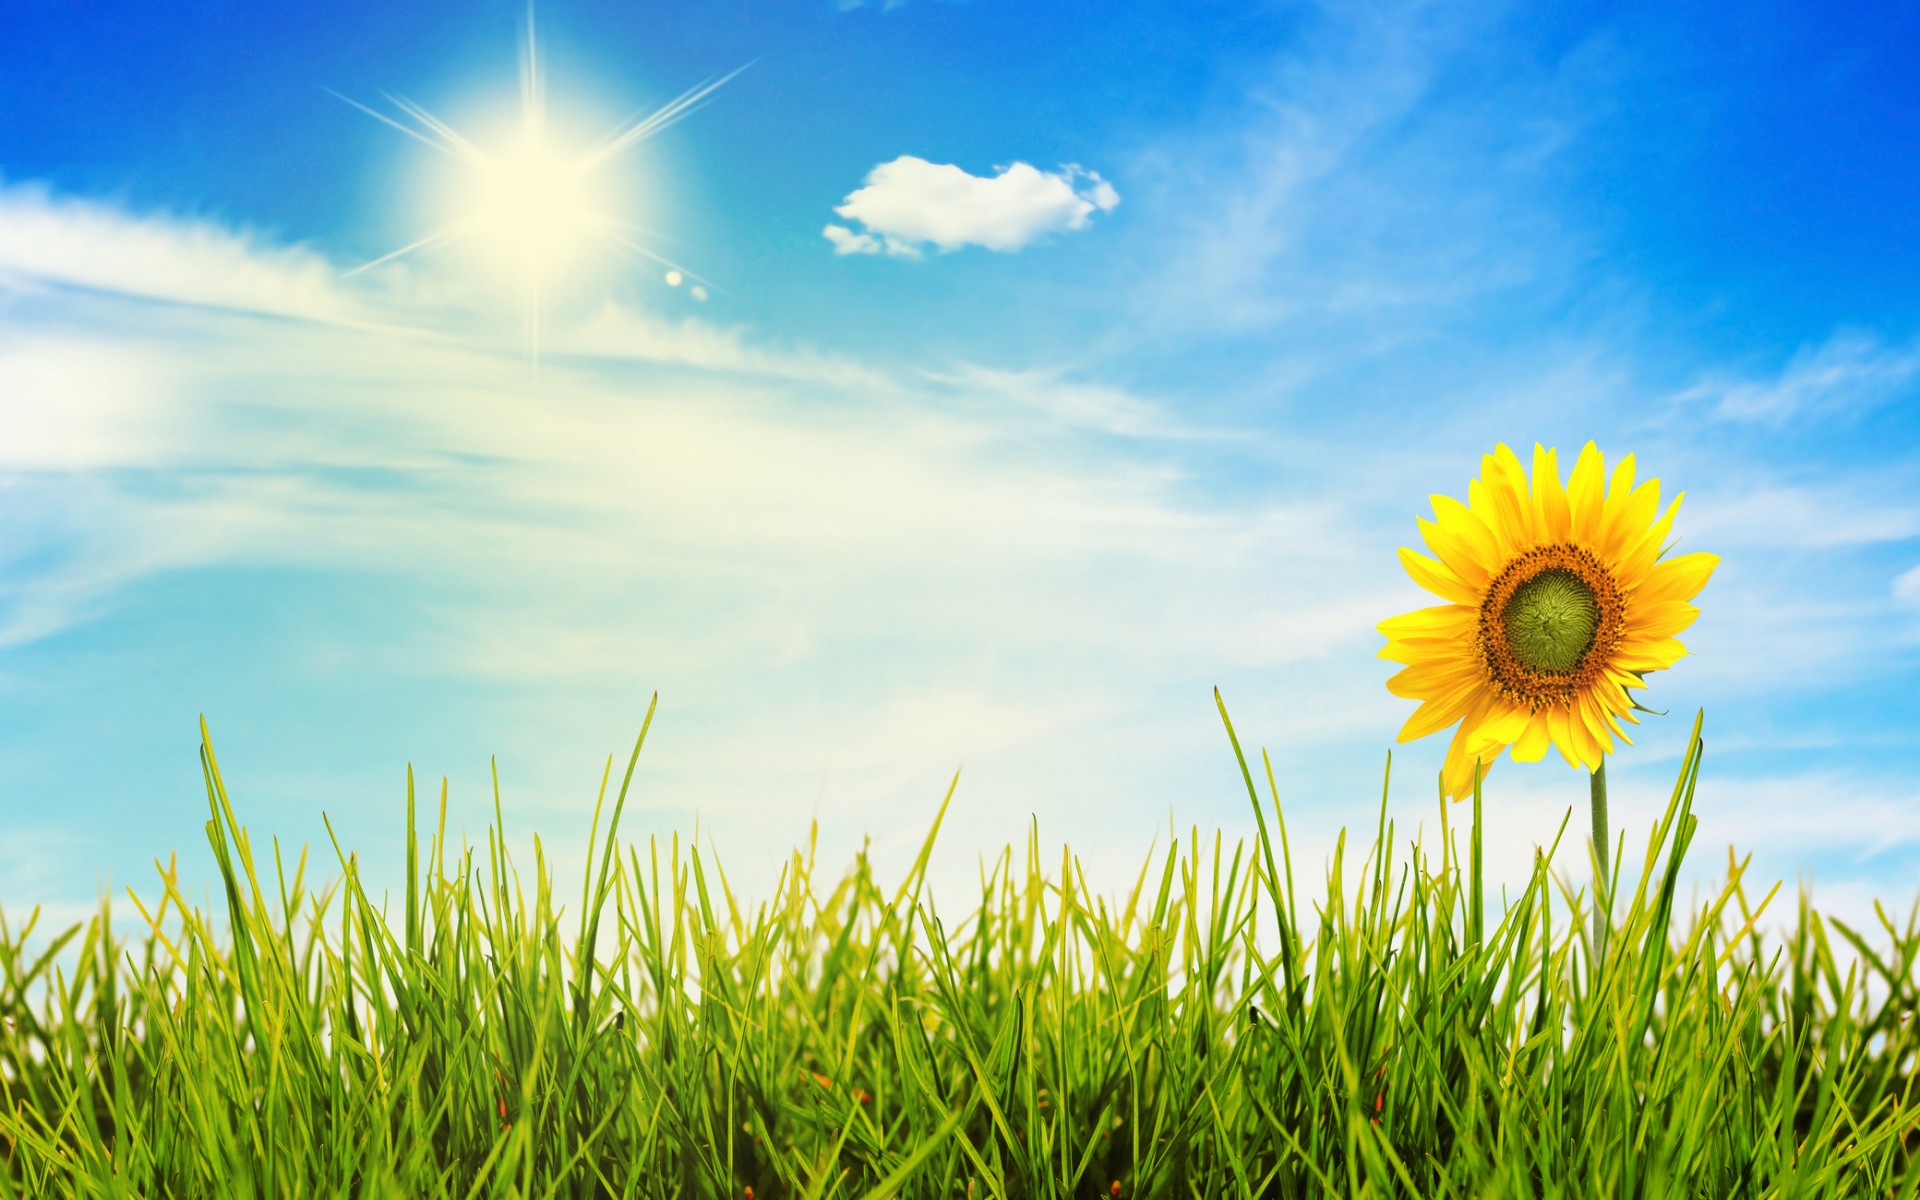 Free Sunny Day Wallpaper by Paul Senna on FL | Nature HDQ | 387.91 KB